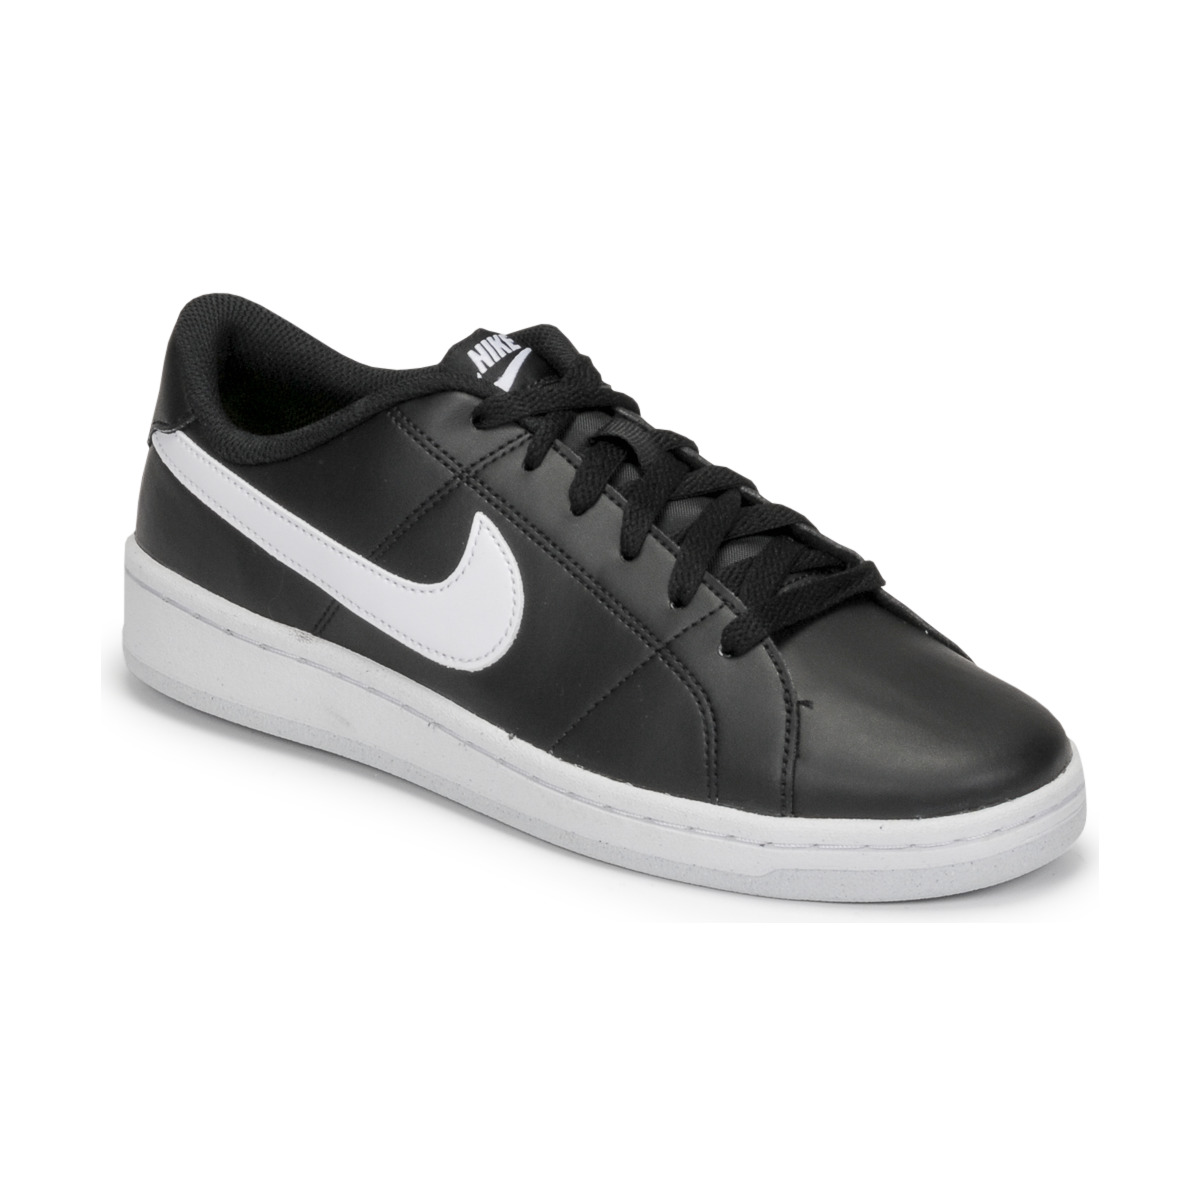 Nike WMNS ROYALE 2 NN Black / White - Free delivery | NET ! - Low top trainers Women USD/$64.50